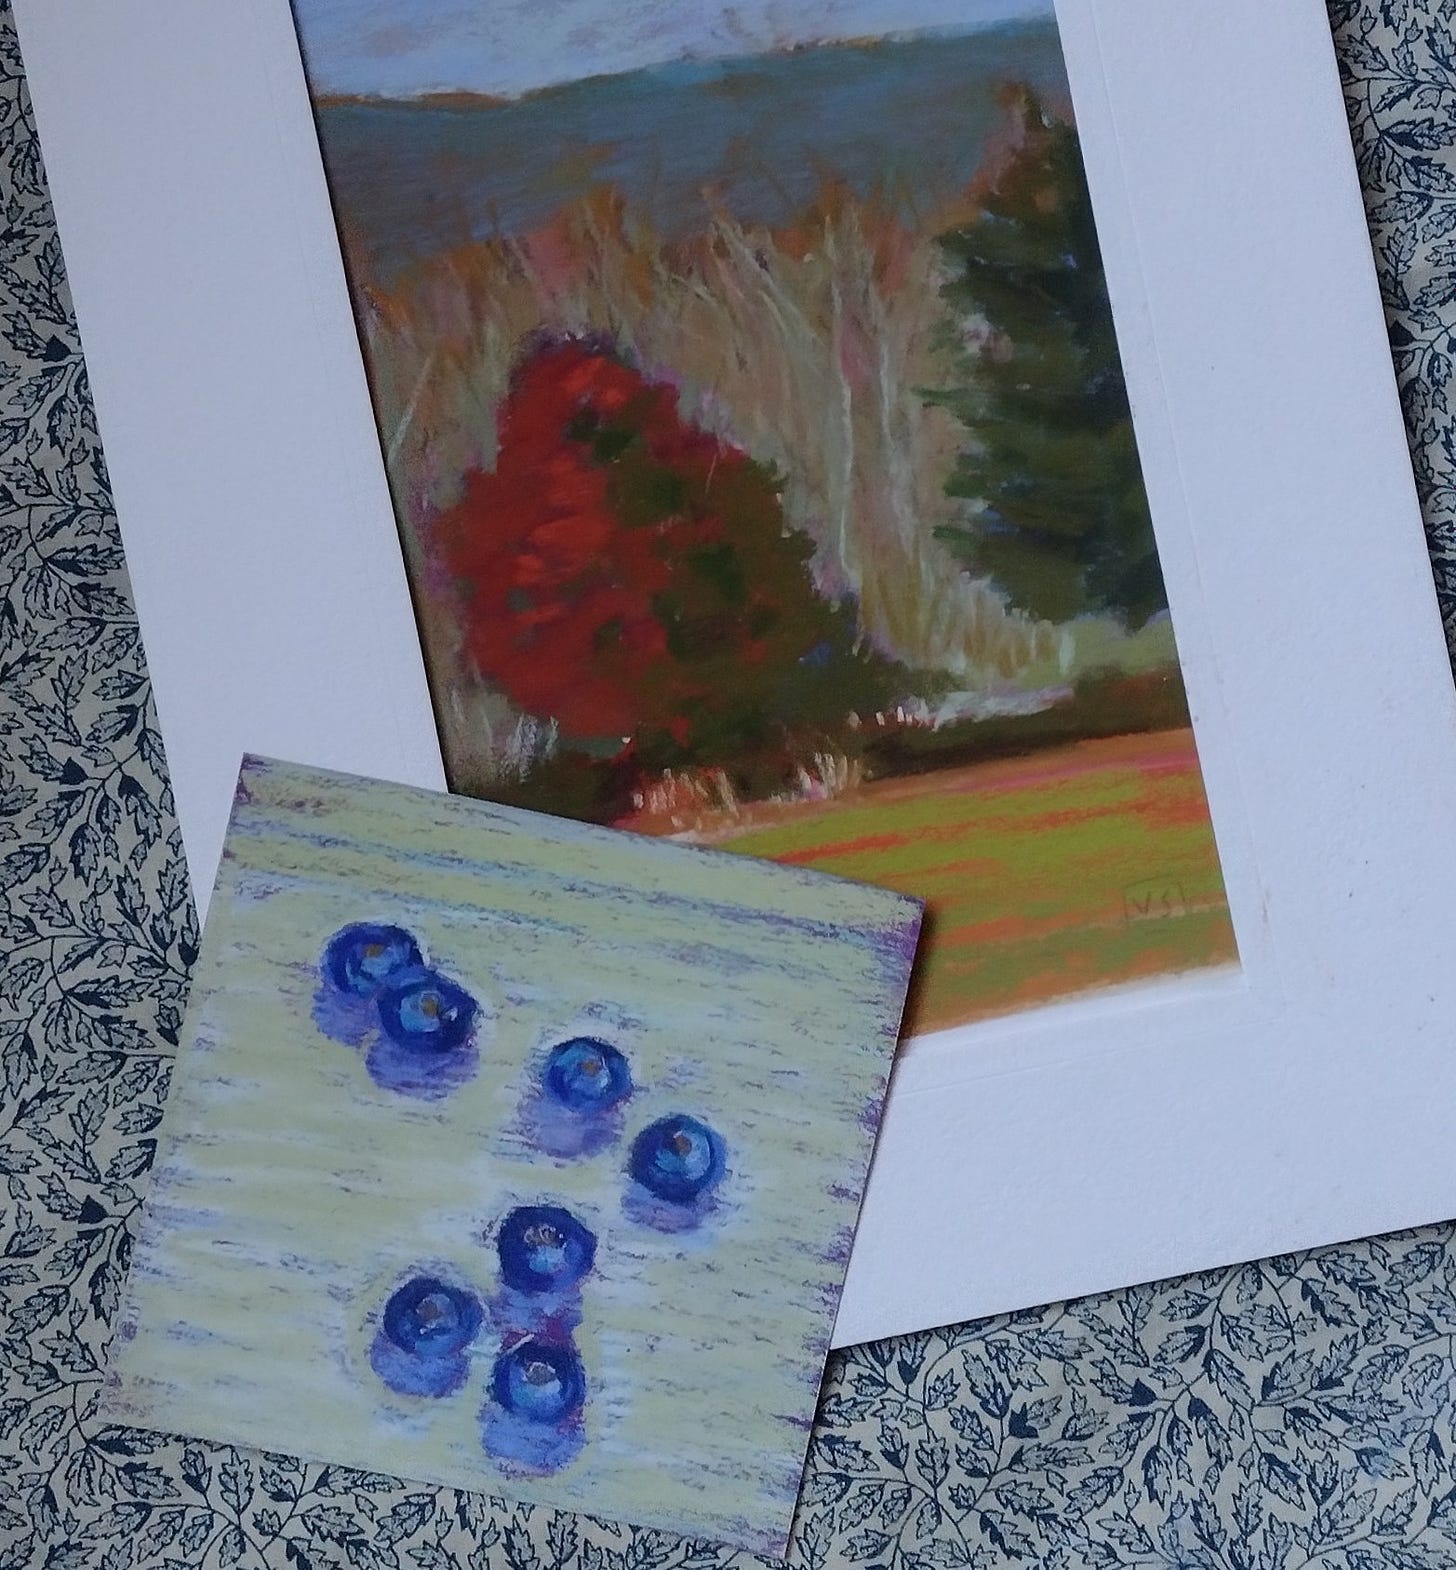 drawing of blueberries and autumn landscape